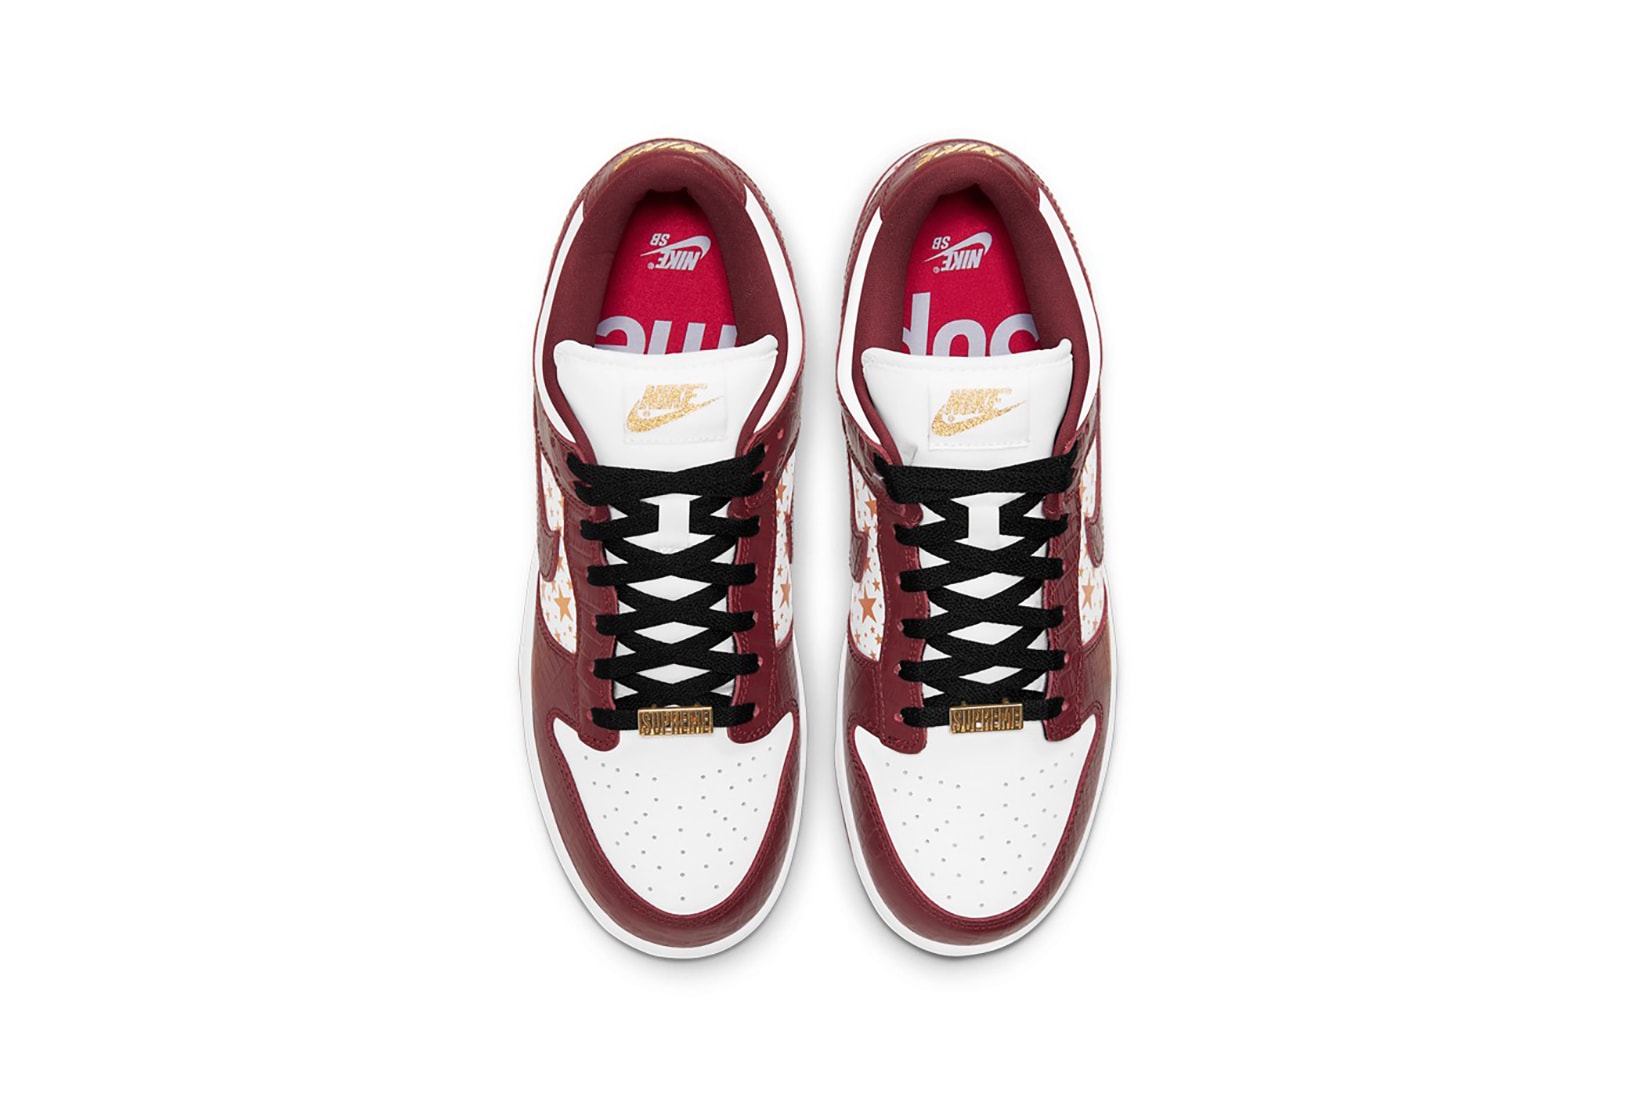 supreme nike sb dunk low collaboration sneakers barkroot brown burgundy red white gold stars black laces insole